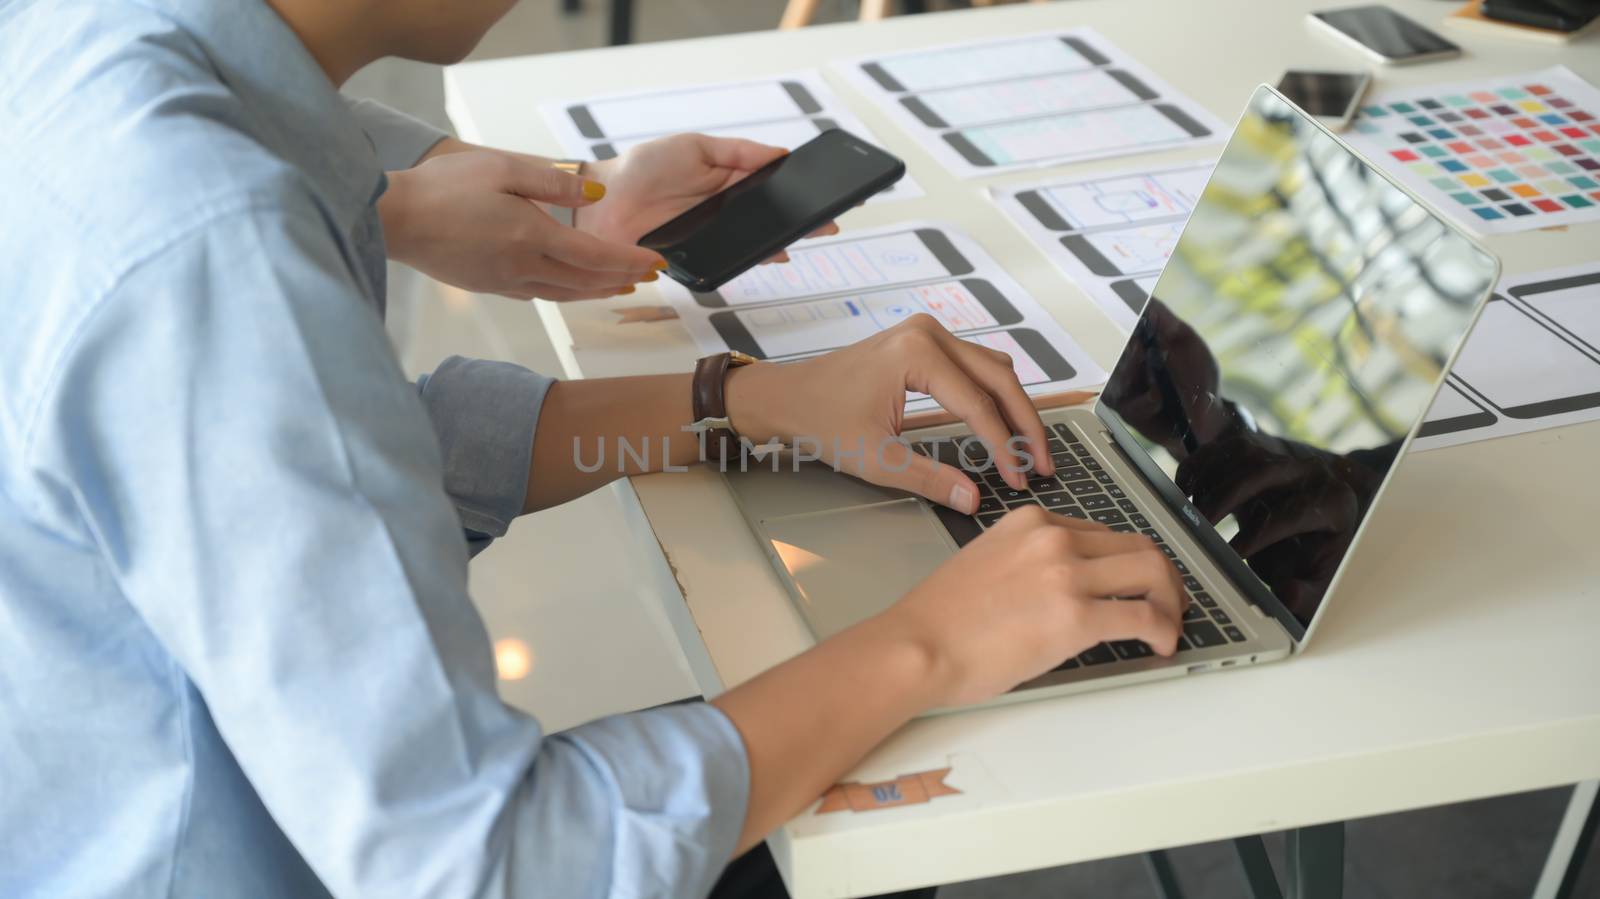 The UX team is designing an application for smartphones with a laptop in a modern office.